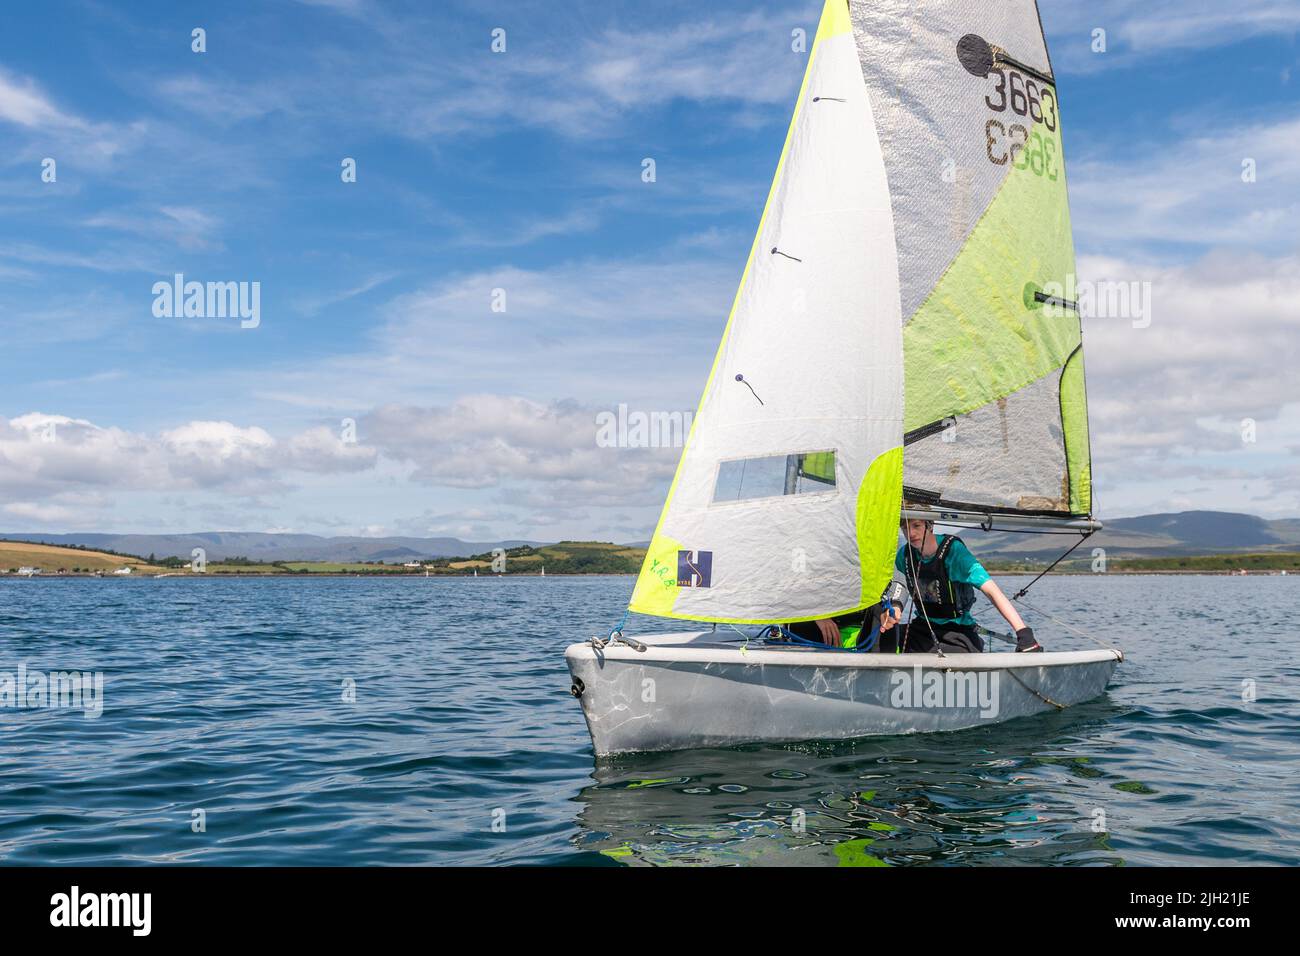 Bantry, West Cork, Ireland. 14th July, 2022. Bantry Bay Sailing Club is holding 'Learn How to Sail' sailing camps for 9 weeks this summer. People from 10 to 80 years old can take to the water and learn how to sail, under experienced instructors. Students were out on the water this morning on a hot and sunny day in West Cork. Credit: AG News/Alamy Live News Stock Photo